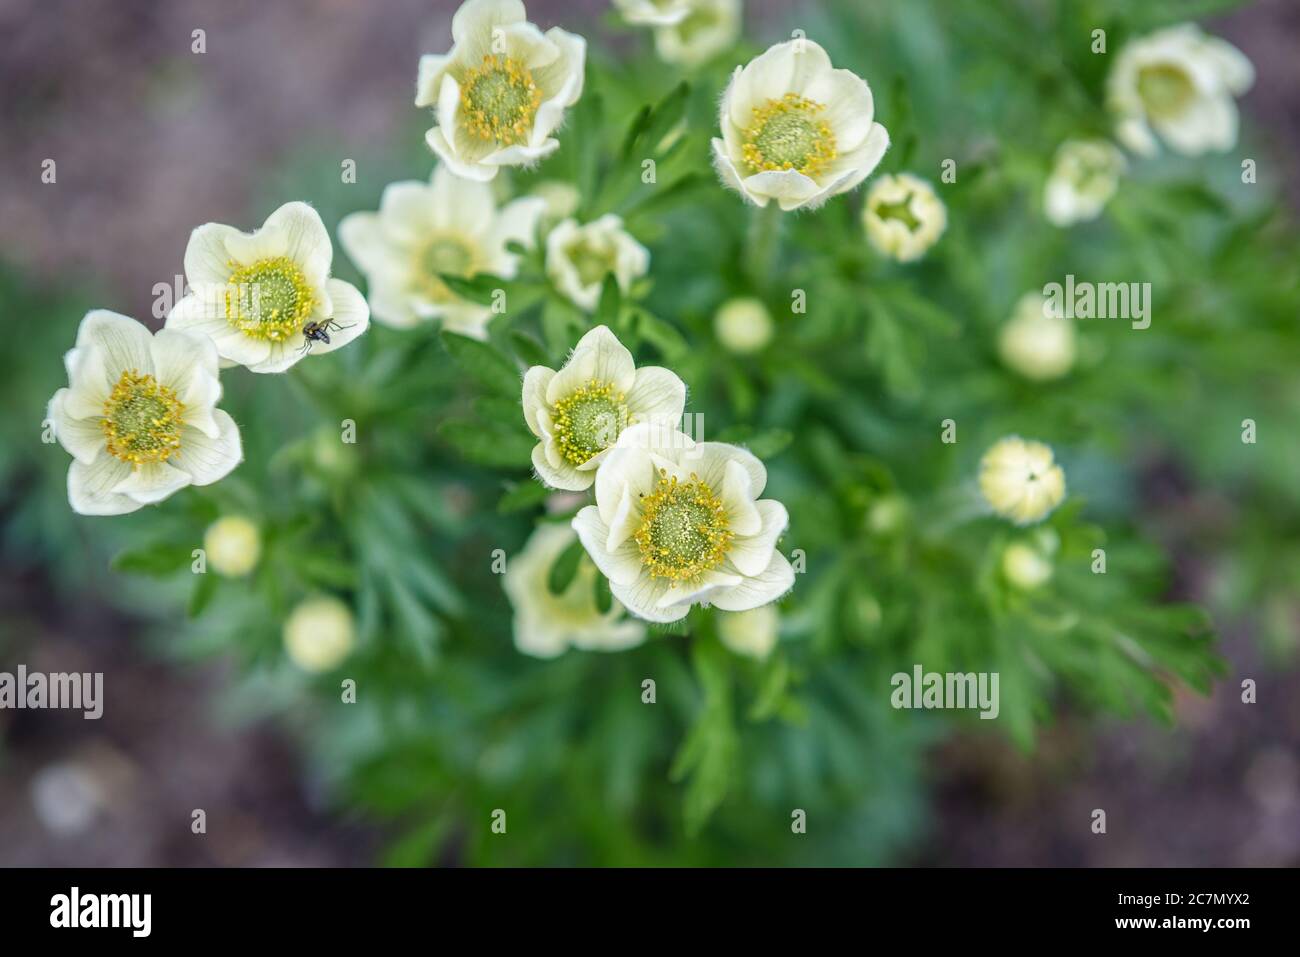 Anemone narcissiflora - narcissus anemone or narcissus flowered anemone, herbaceous perennial in the genus Anemone and the buttercup family Stock Photo